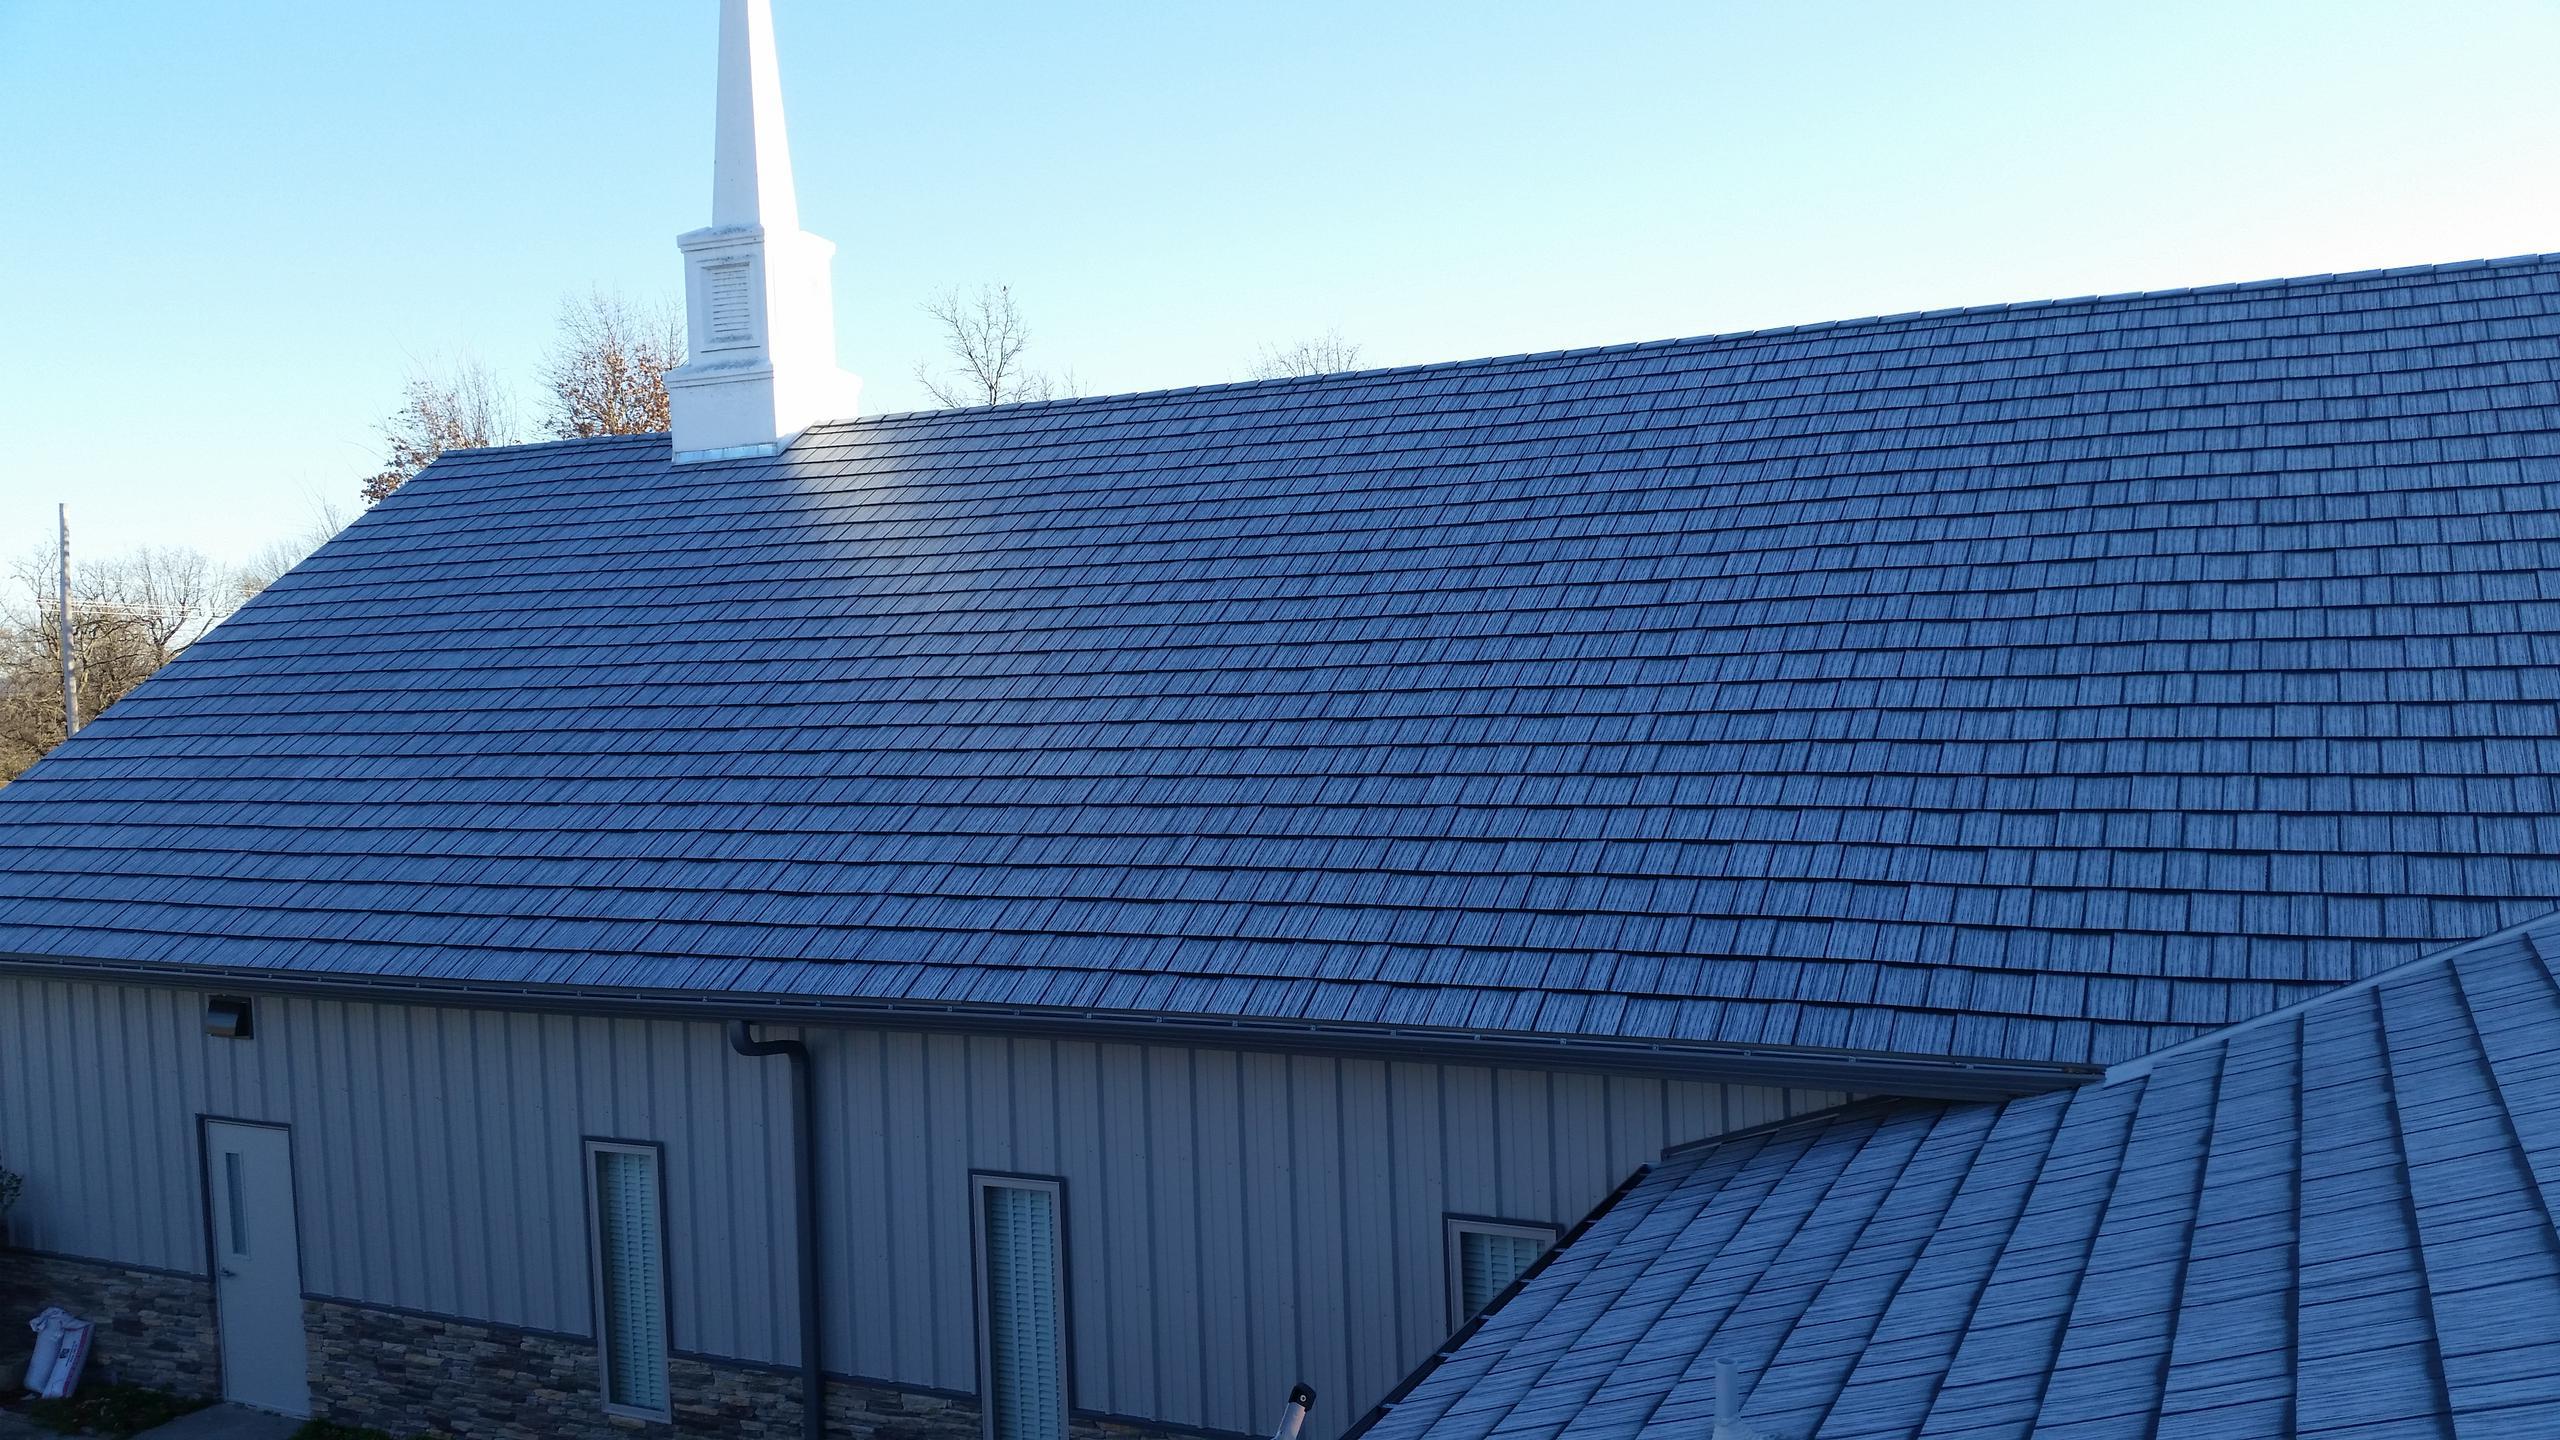 Generations HD Shake Charcoal Gray Roofing was selected for this church as a result of its unmatched warranty and the rustic dimension and naturalism to traditional hand-split cedar shakes.